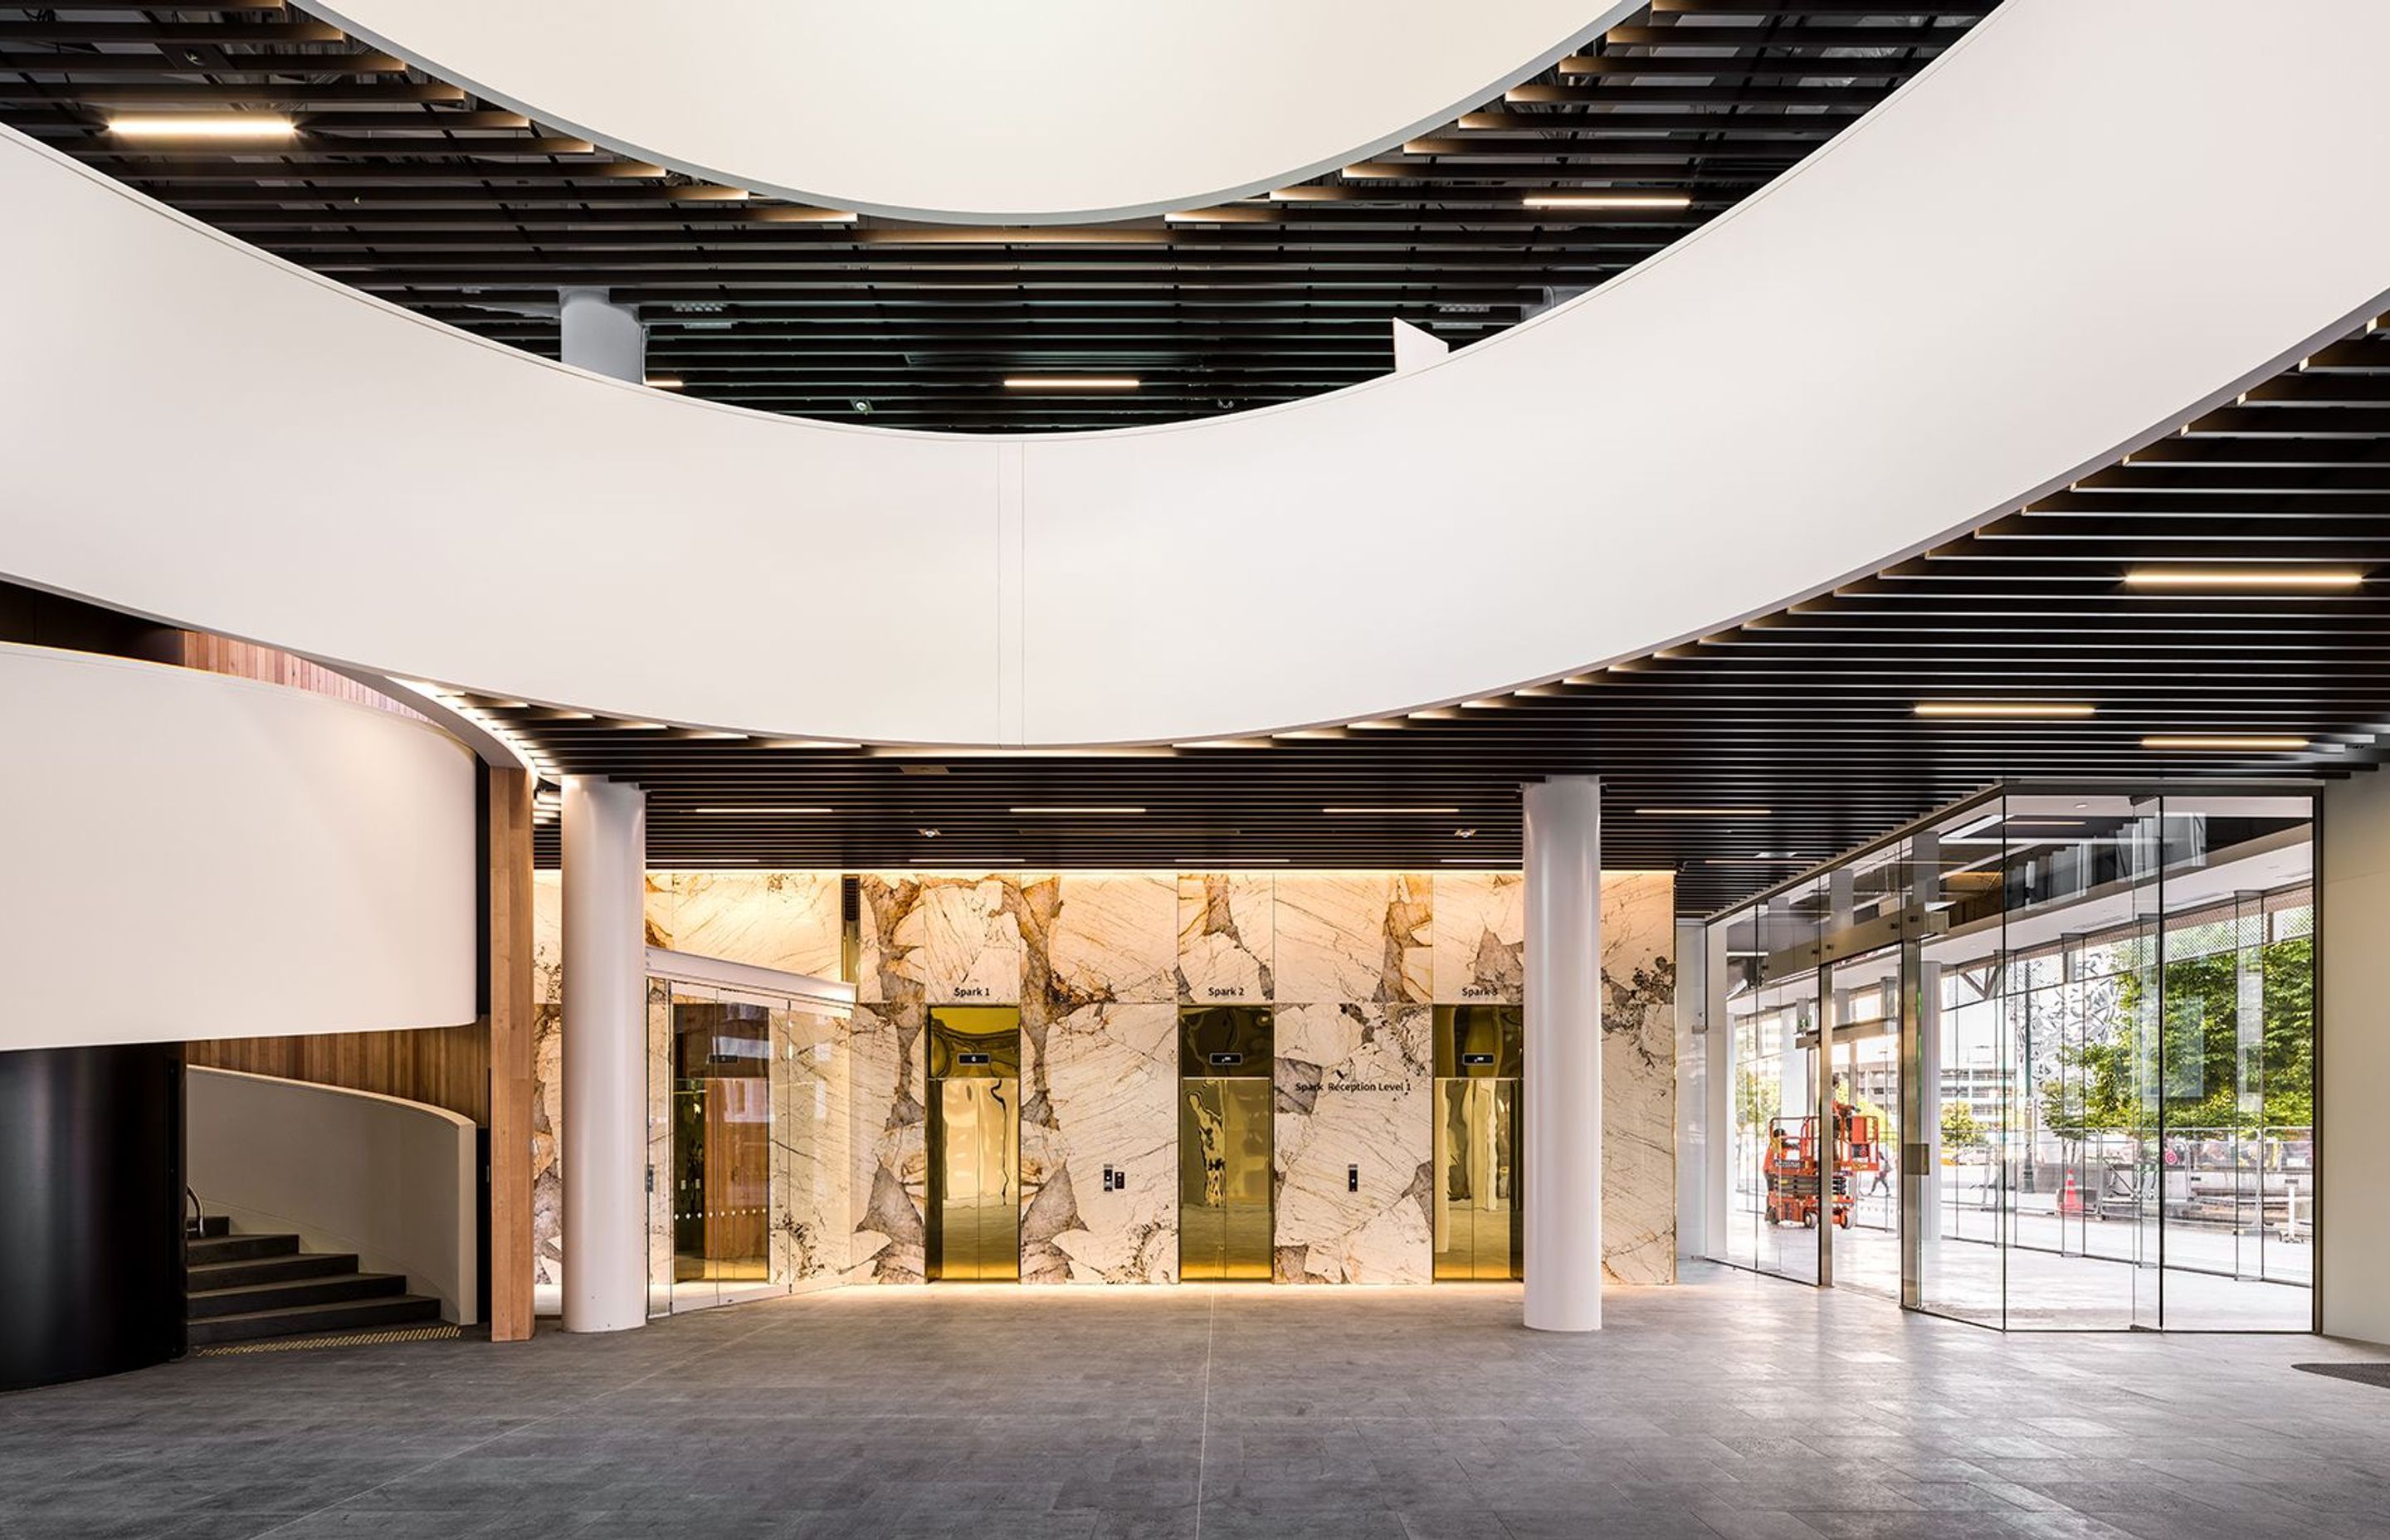 Filled with shops, bars and restaurants, the ground floor atrium features a dramatic spiral staircase in the public area, seen here with shiny reflective lift doors below.